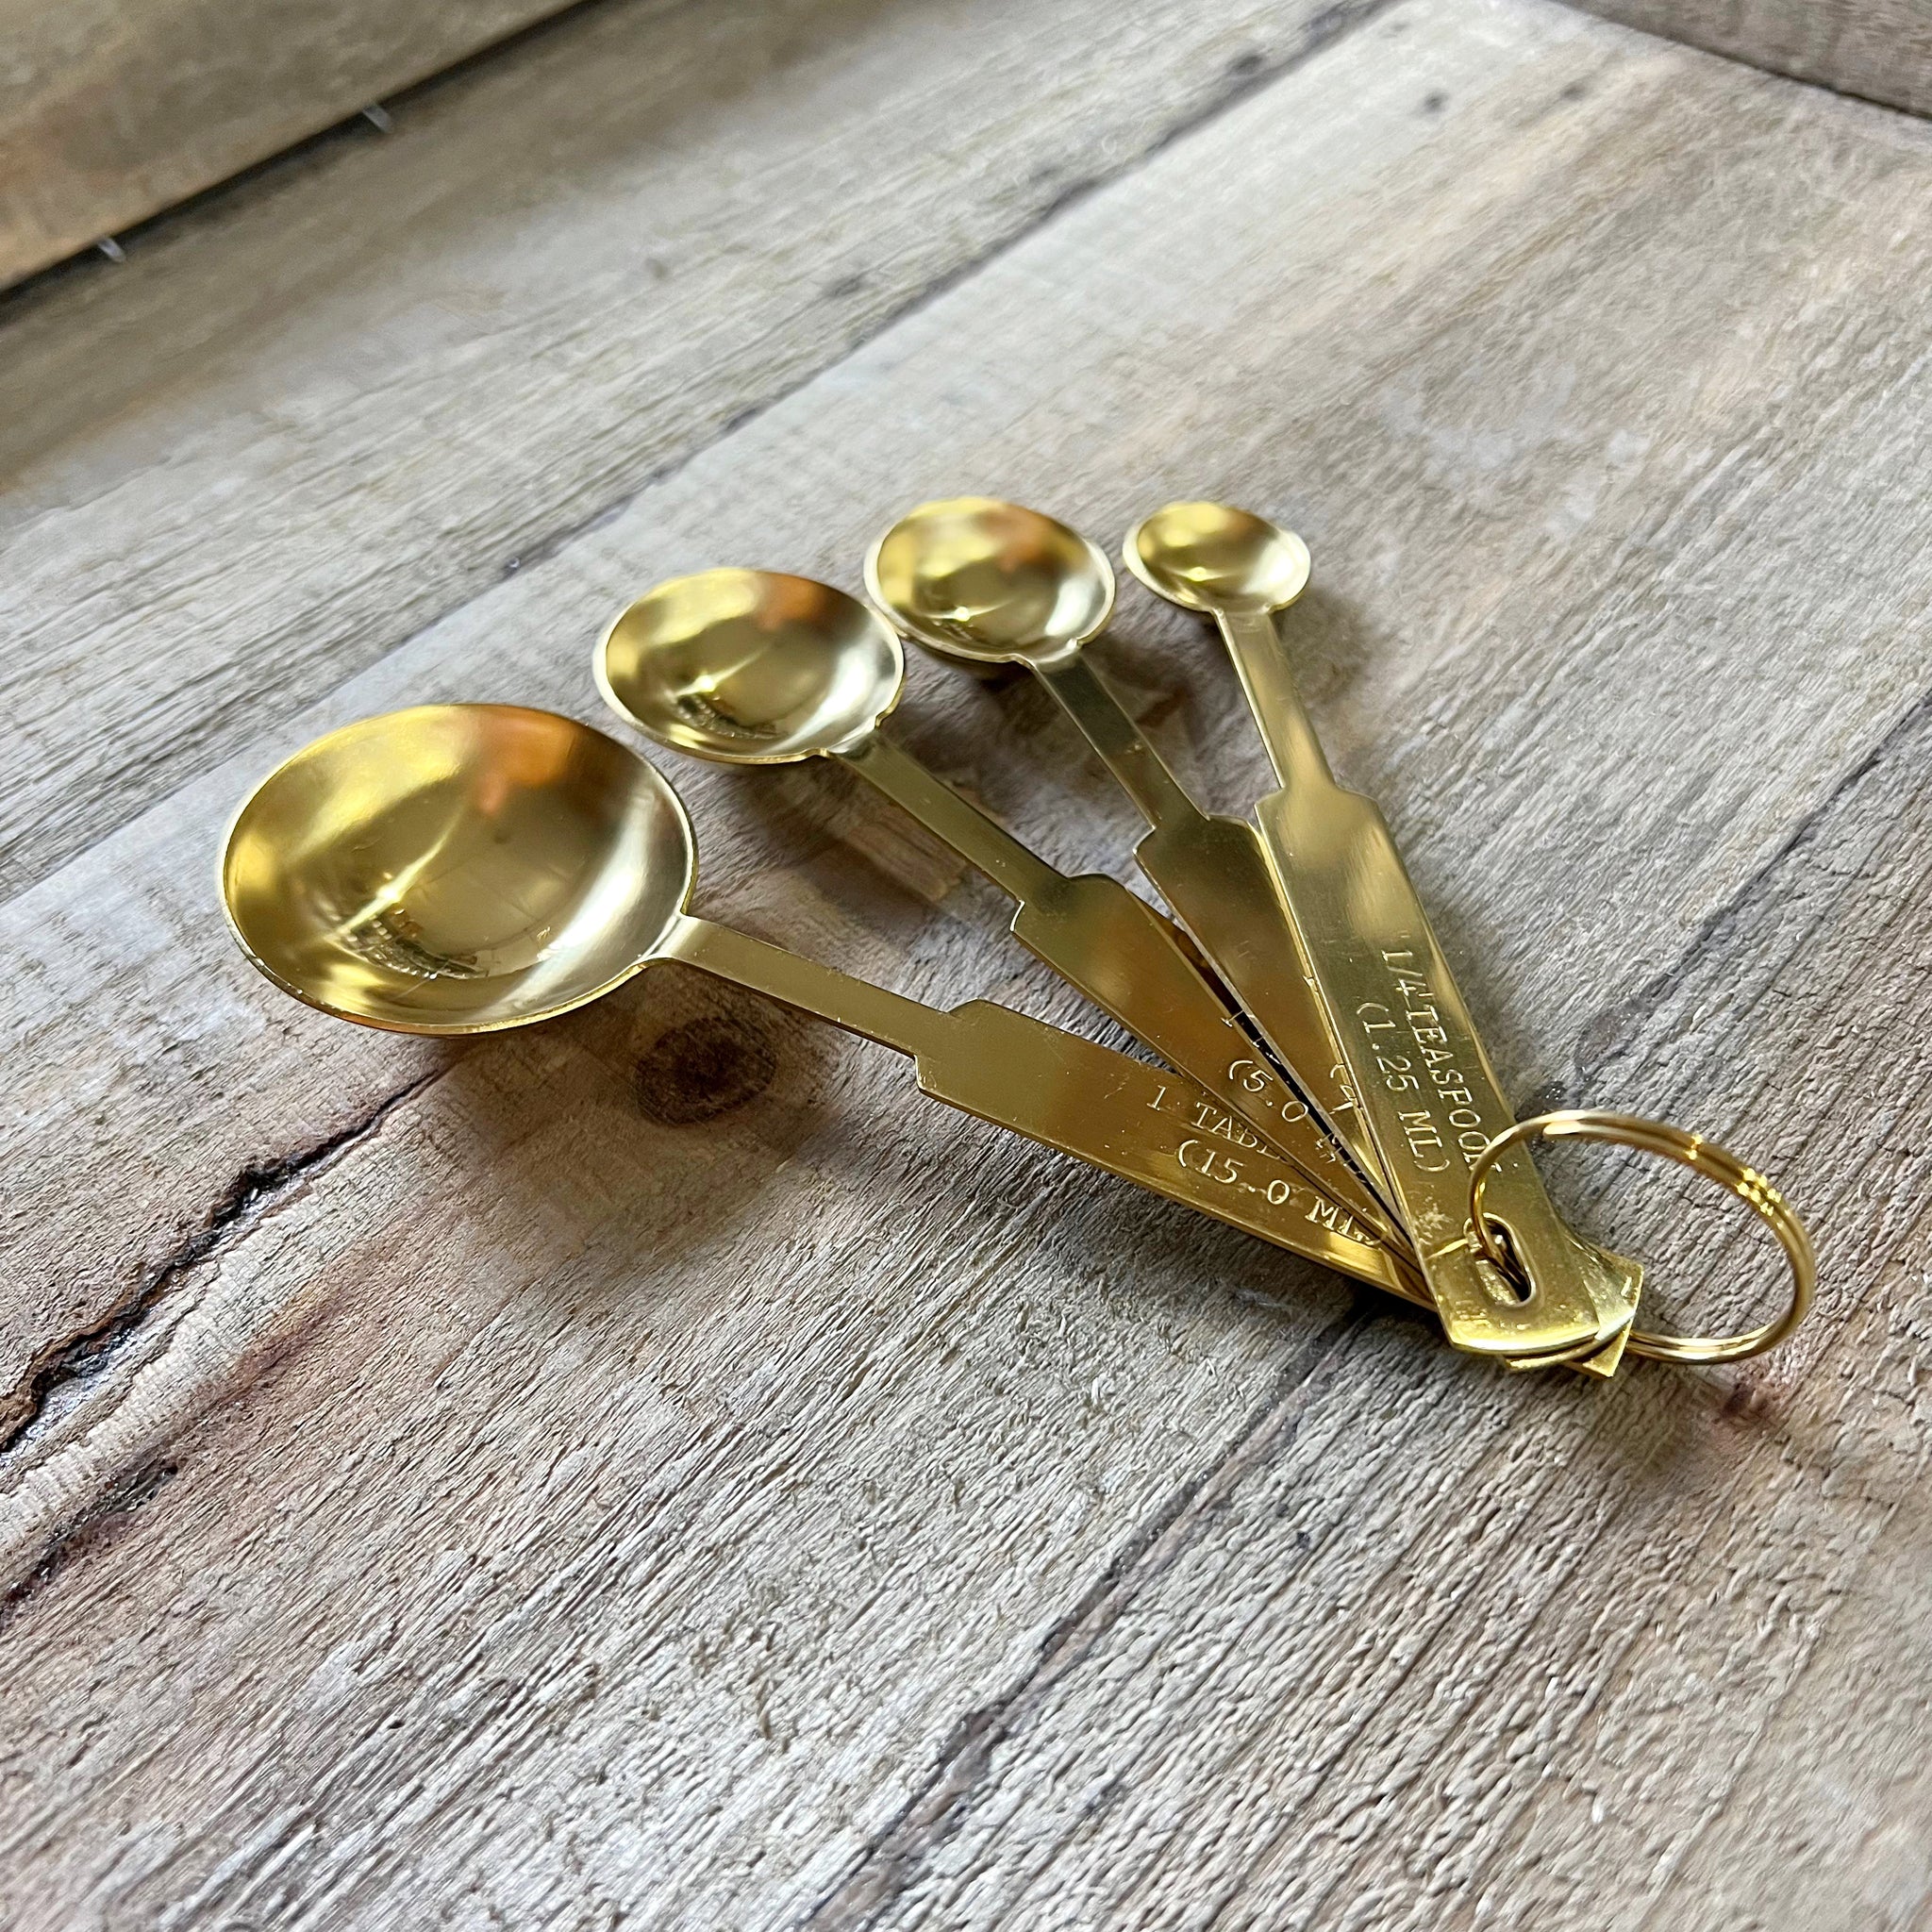 s/4 Stainless Steel Measuring Spoons - White Birch Design Company